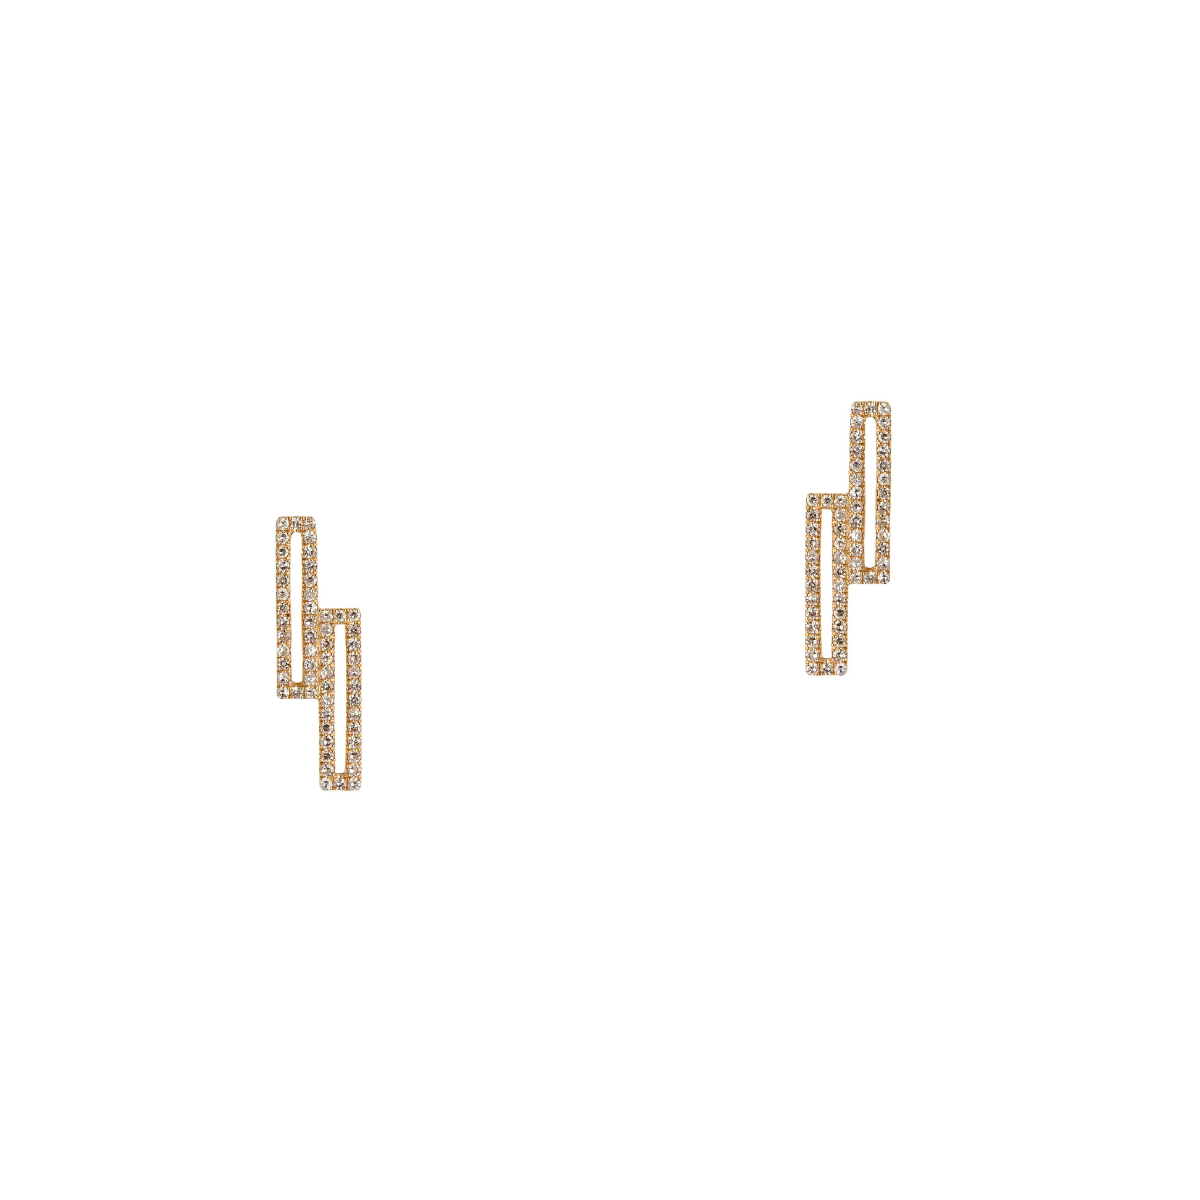 Bridget King Staggered Open Bar Diamond Studs in Yellow Gold